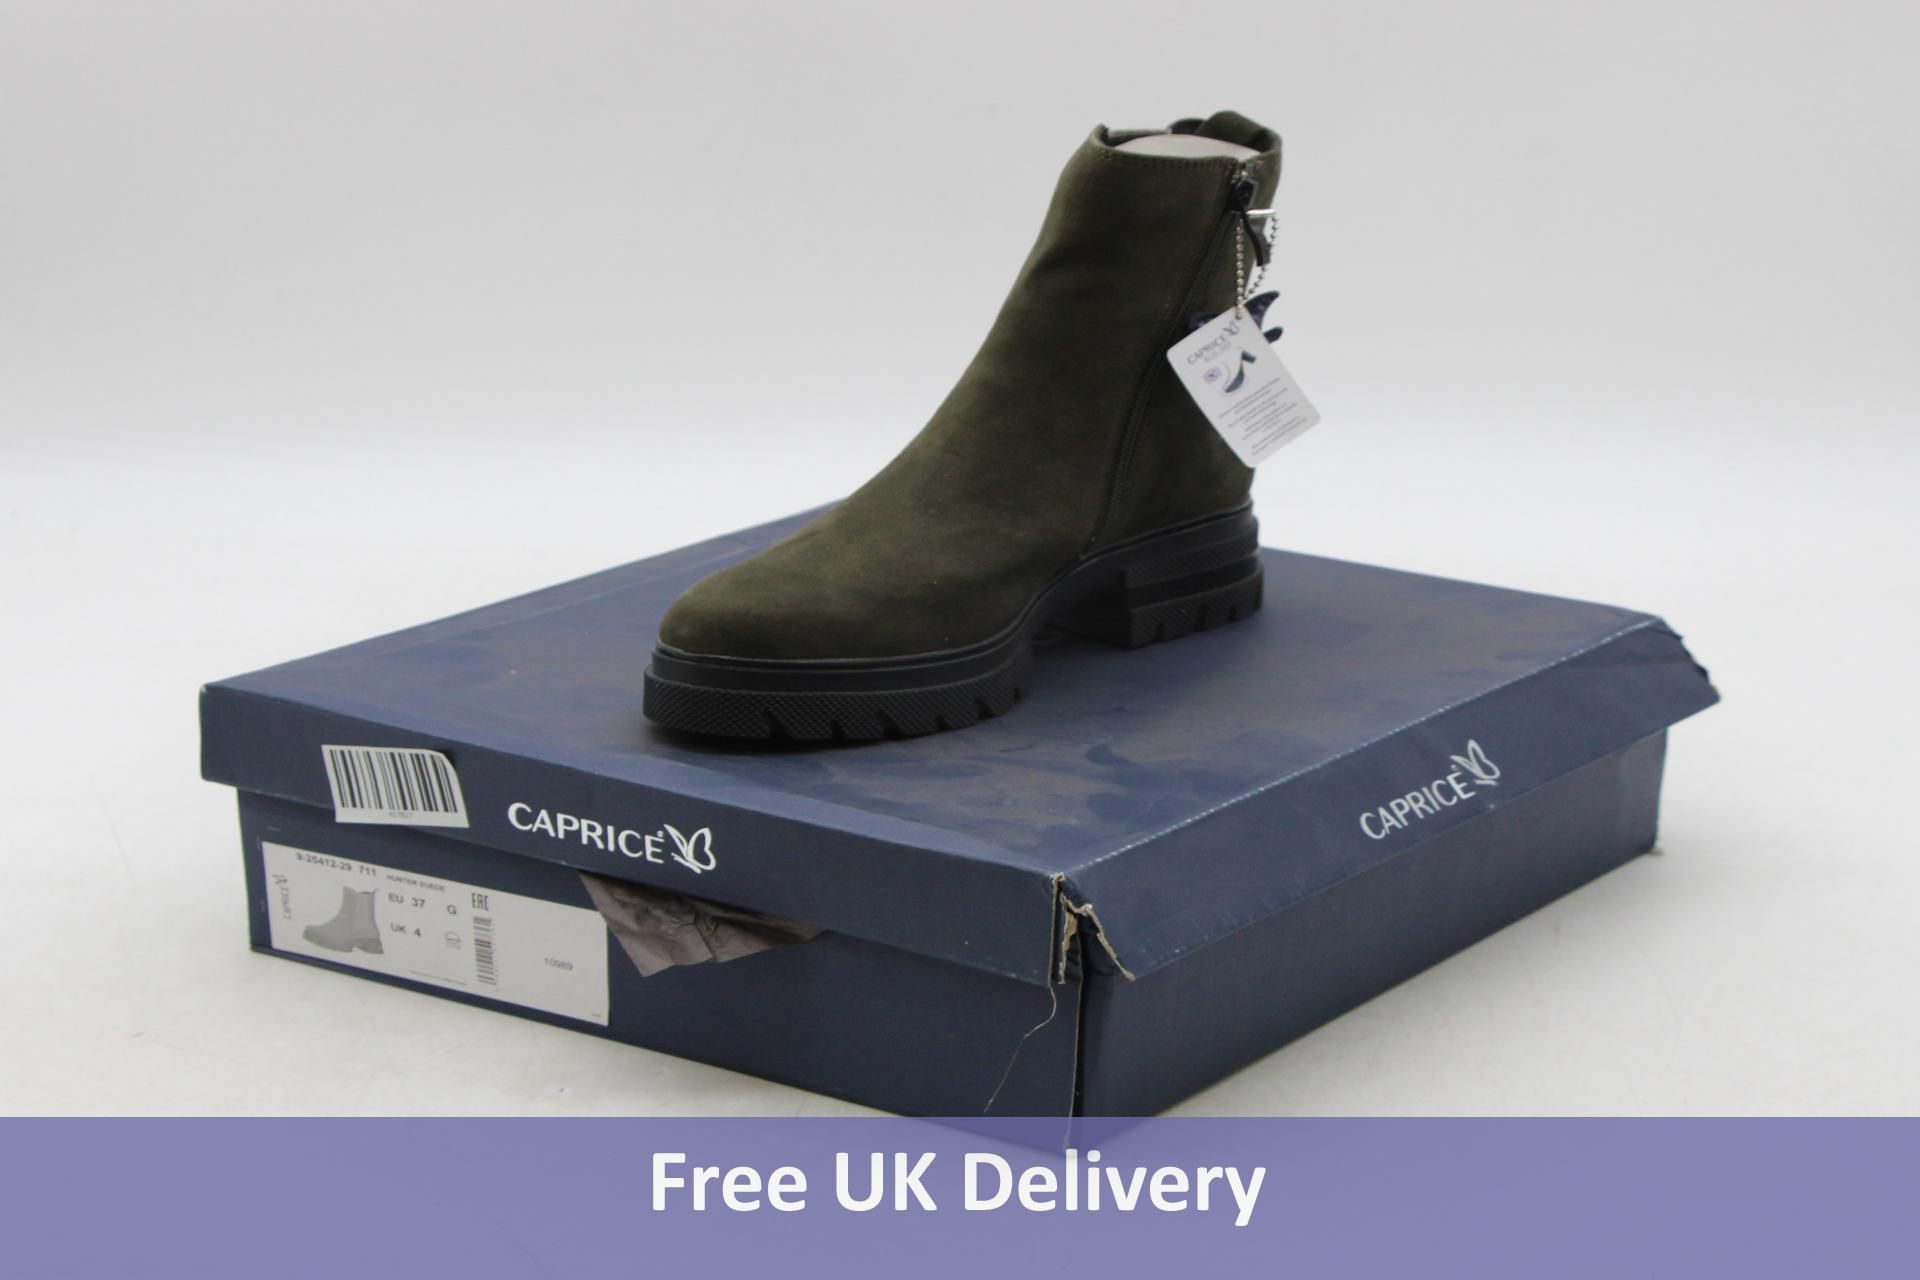 Caprice Women's Hunter Suede Leather Ankle Boots, Olive, UK 4. Box damaged